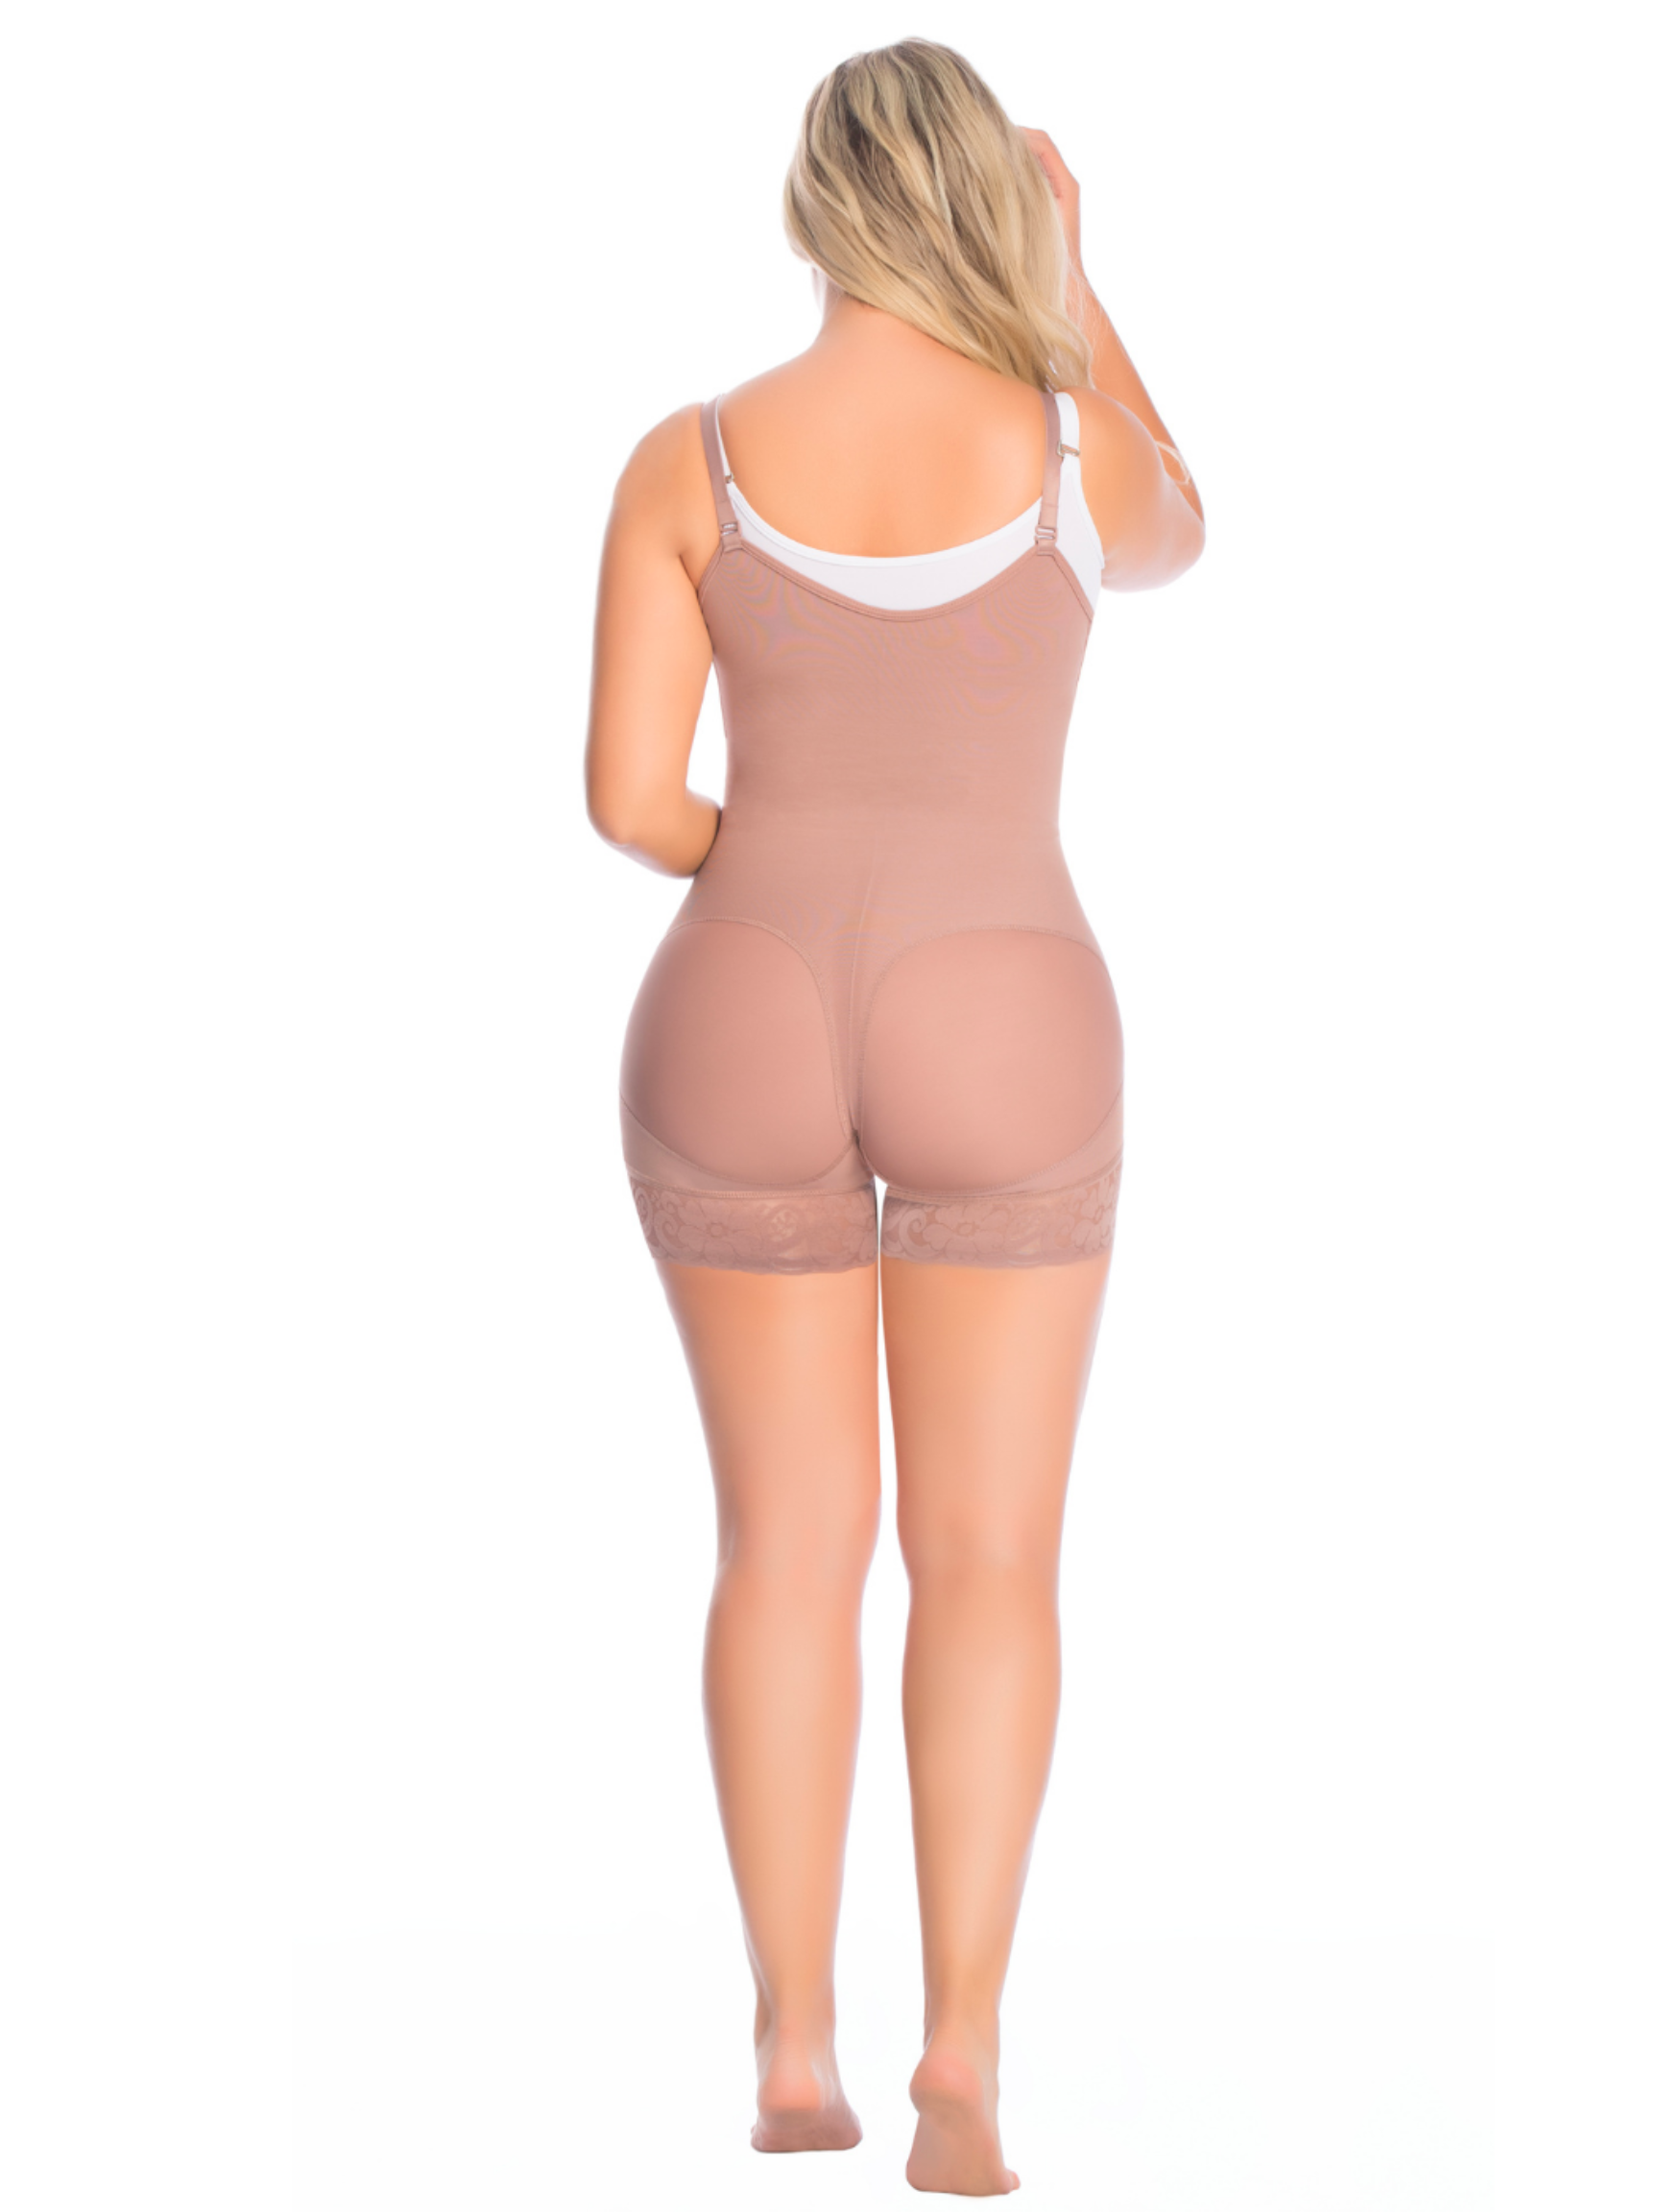 Postpartum and C-Section compression garments : Delie by Fajate Ref 09 –  Salud y Figura Facil